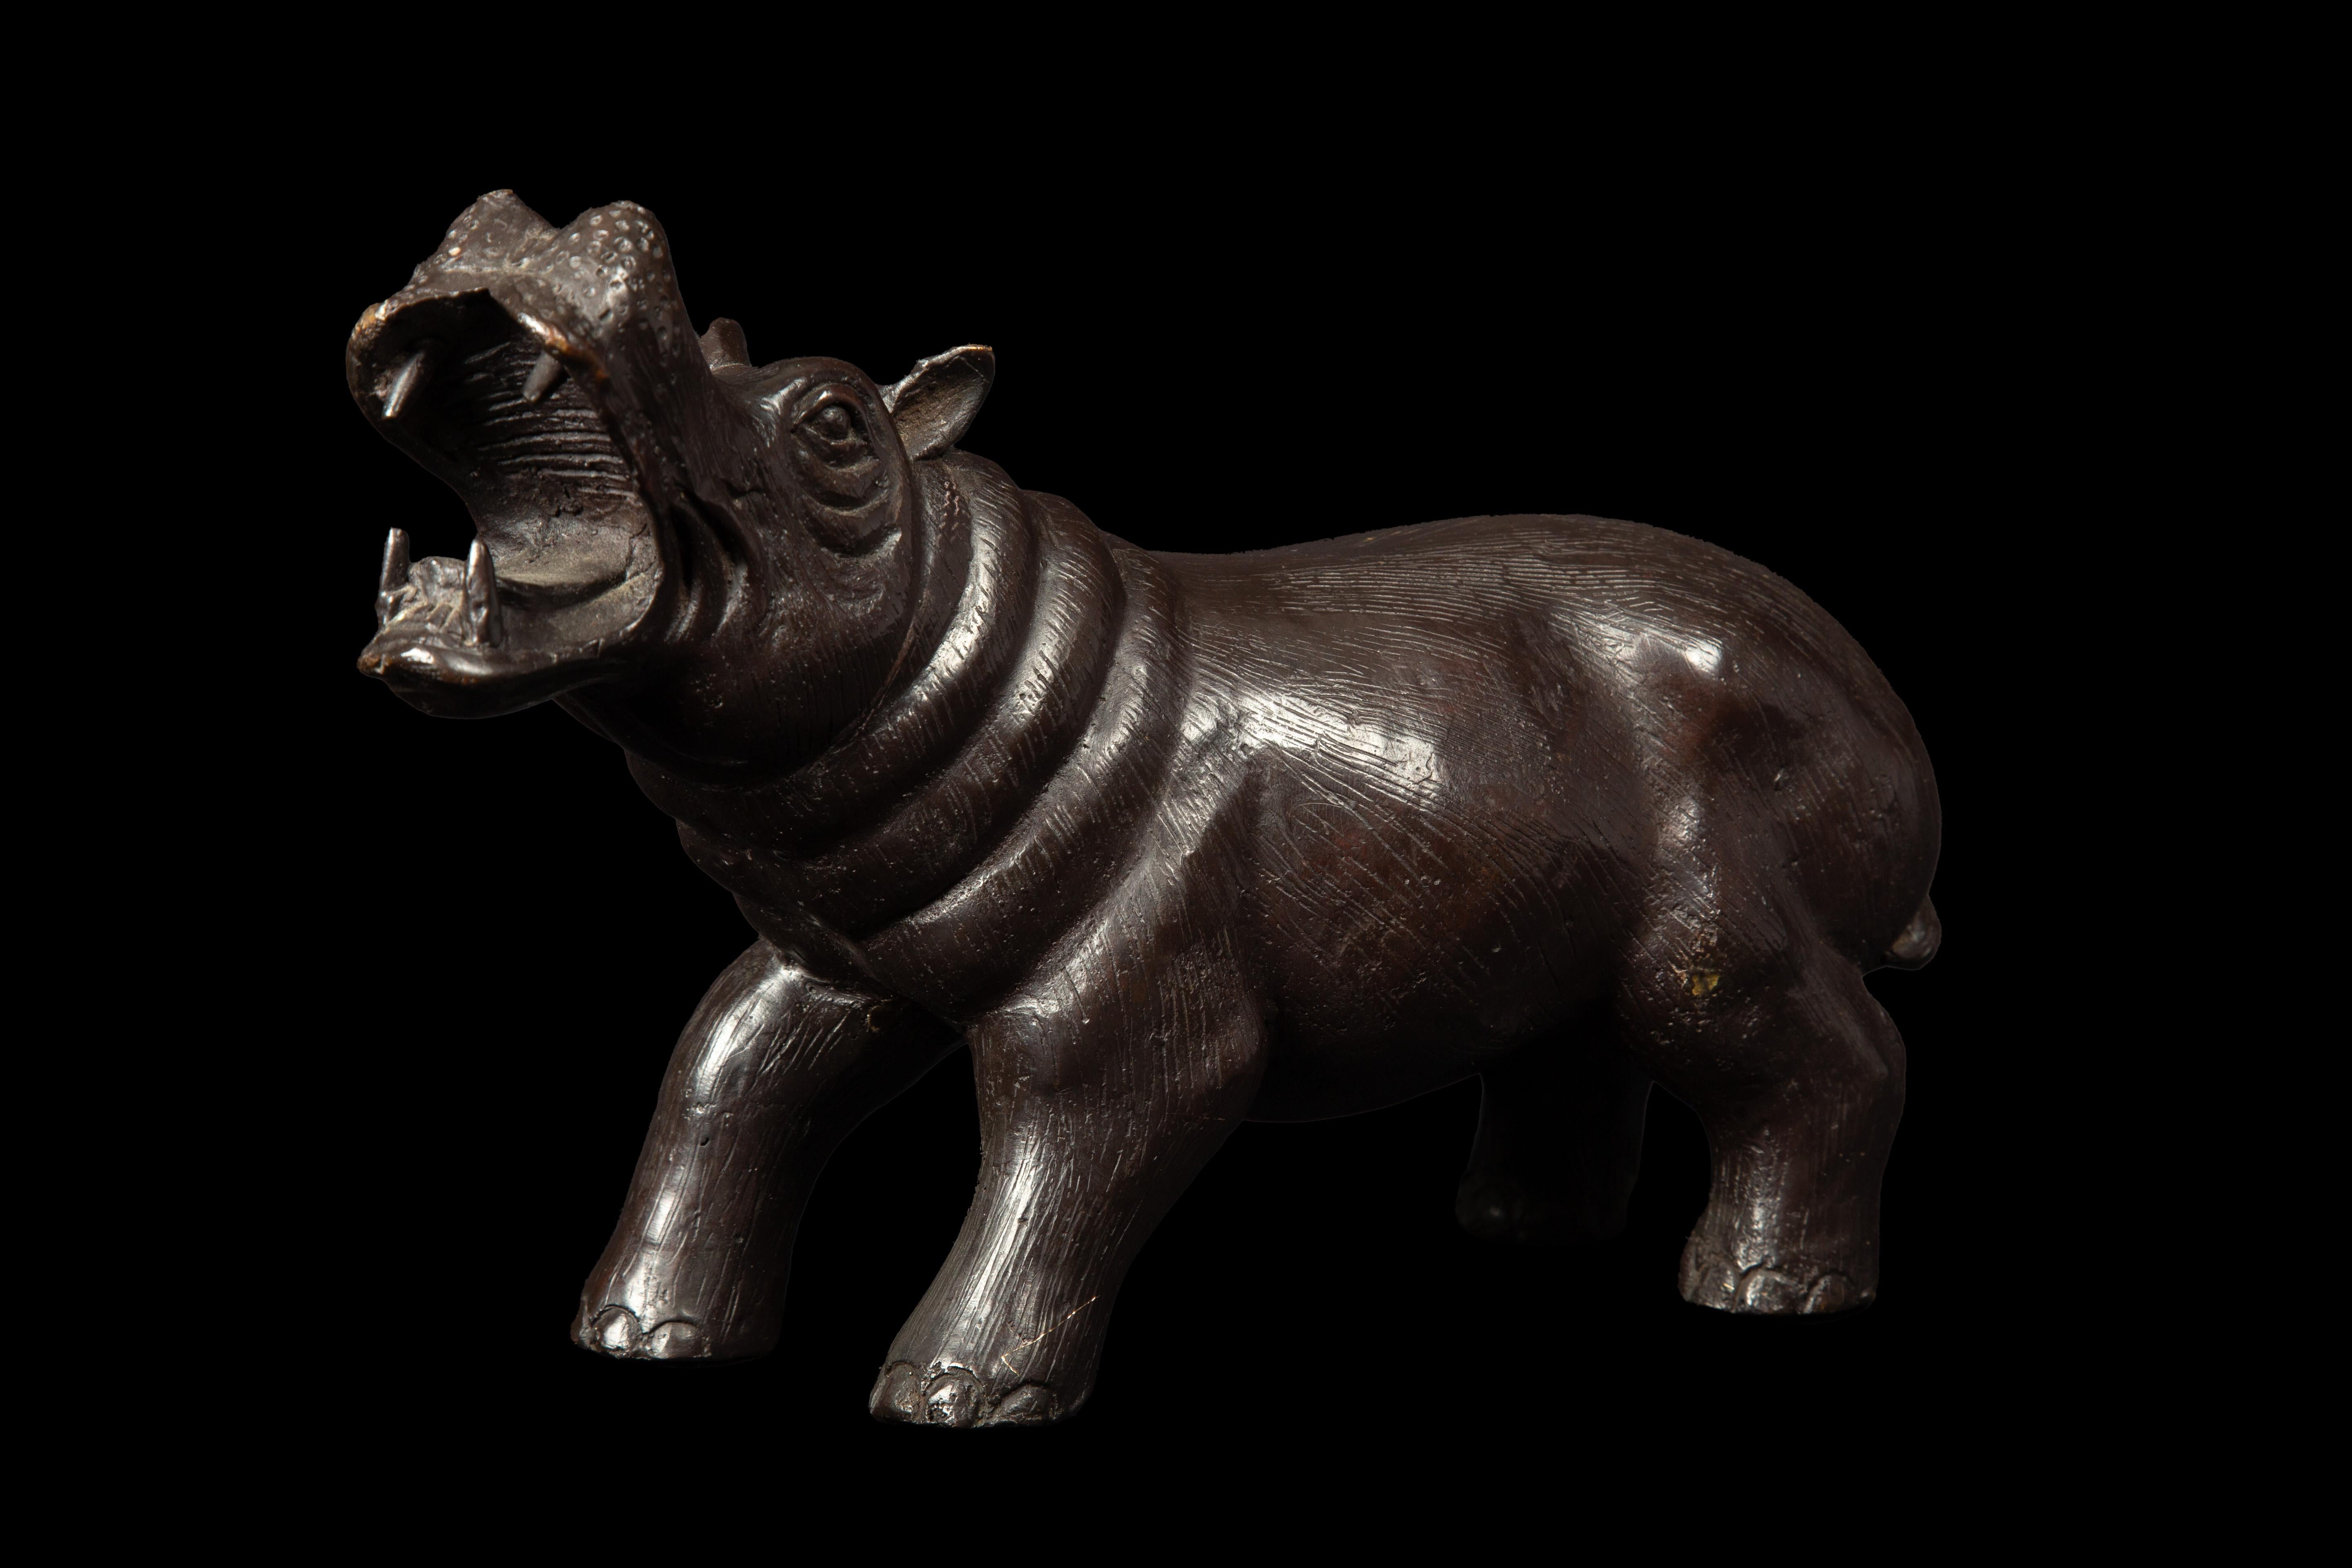 Bronze sculpture of a Hippopotamus with a brown patina showcases the creature's power and beauty. With its open mouth and intricate details, the sculpture exudes a timeless presence that commands attention.

Measure: 11